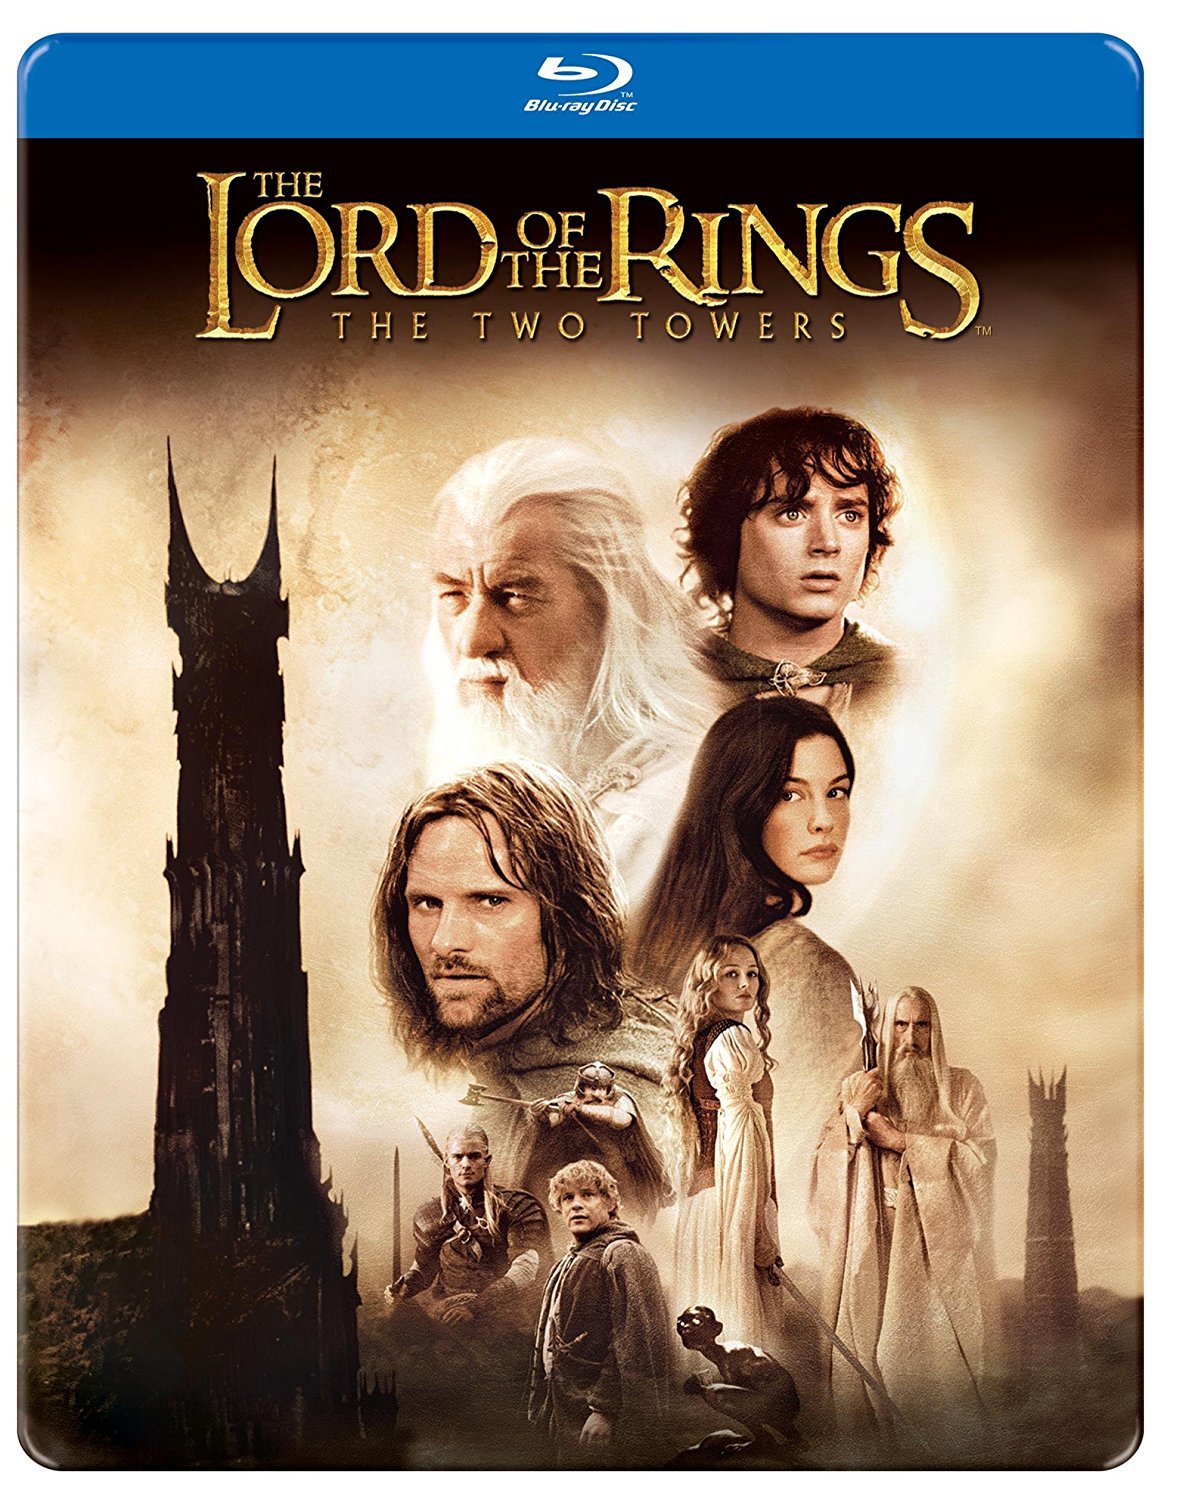 download the new version for android The Lord of the Rings: The Two Towers